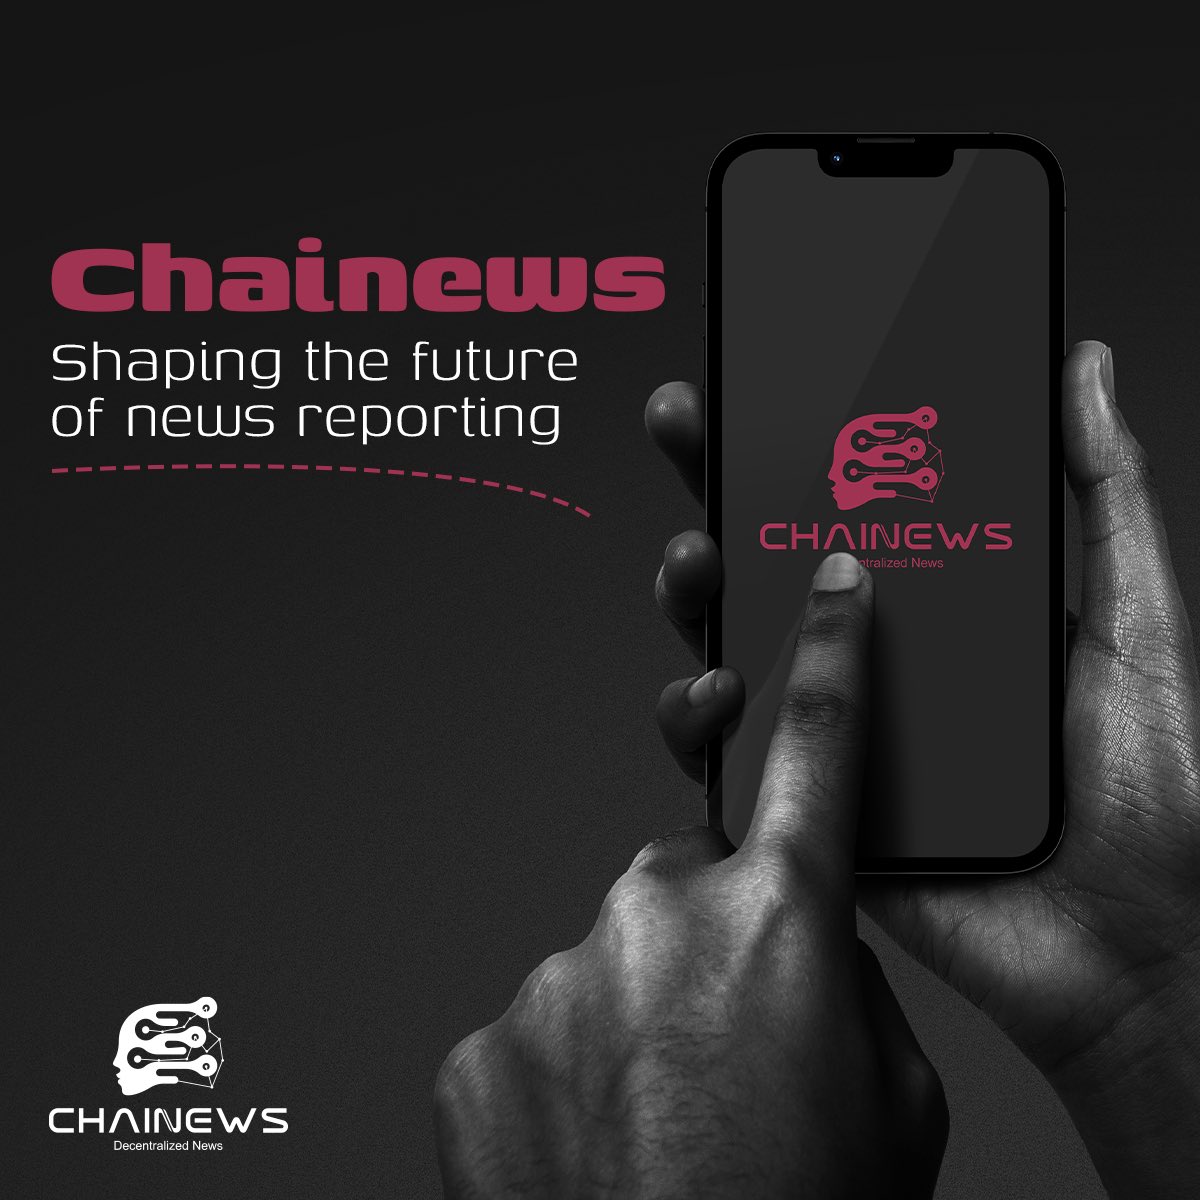 Shaping the future of news reporting 🤳 #blockchain #blockchaintechnology #blockchainnews #blockchains #blockchainrevolution #blockchainconsulting #blockchainteam #blockchainfund #blockchaintech #blockchaincrypto #blockchaineum #blockchainmarketing #chainews